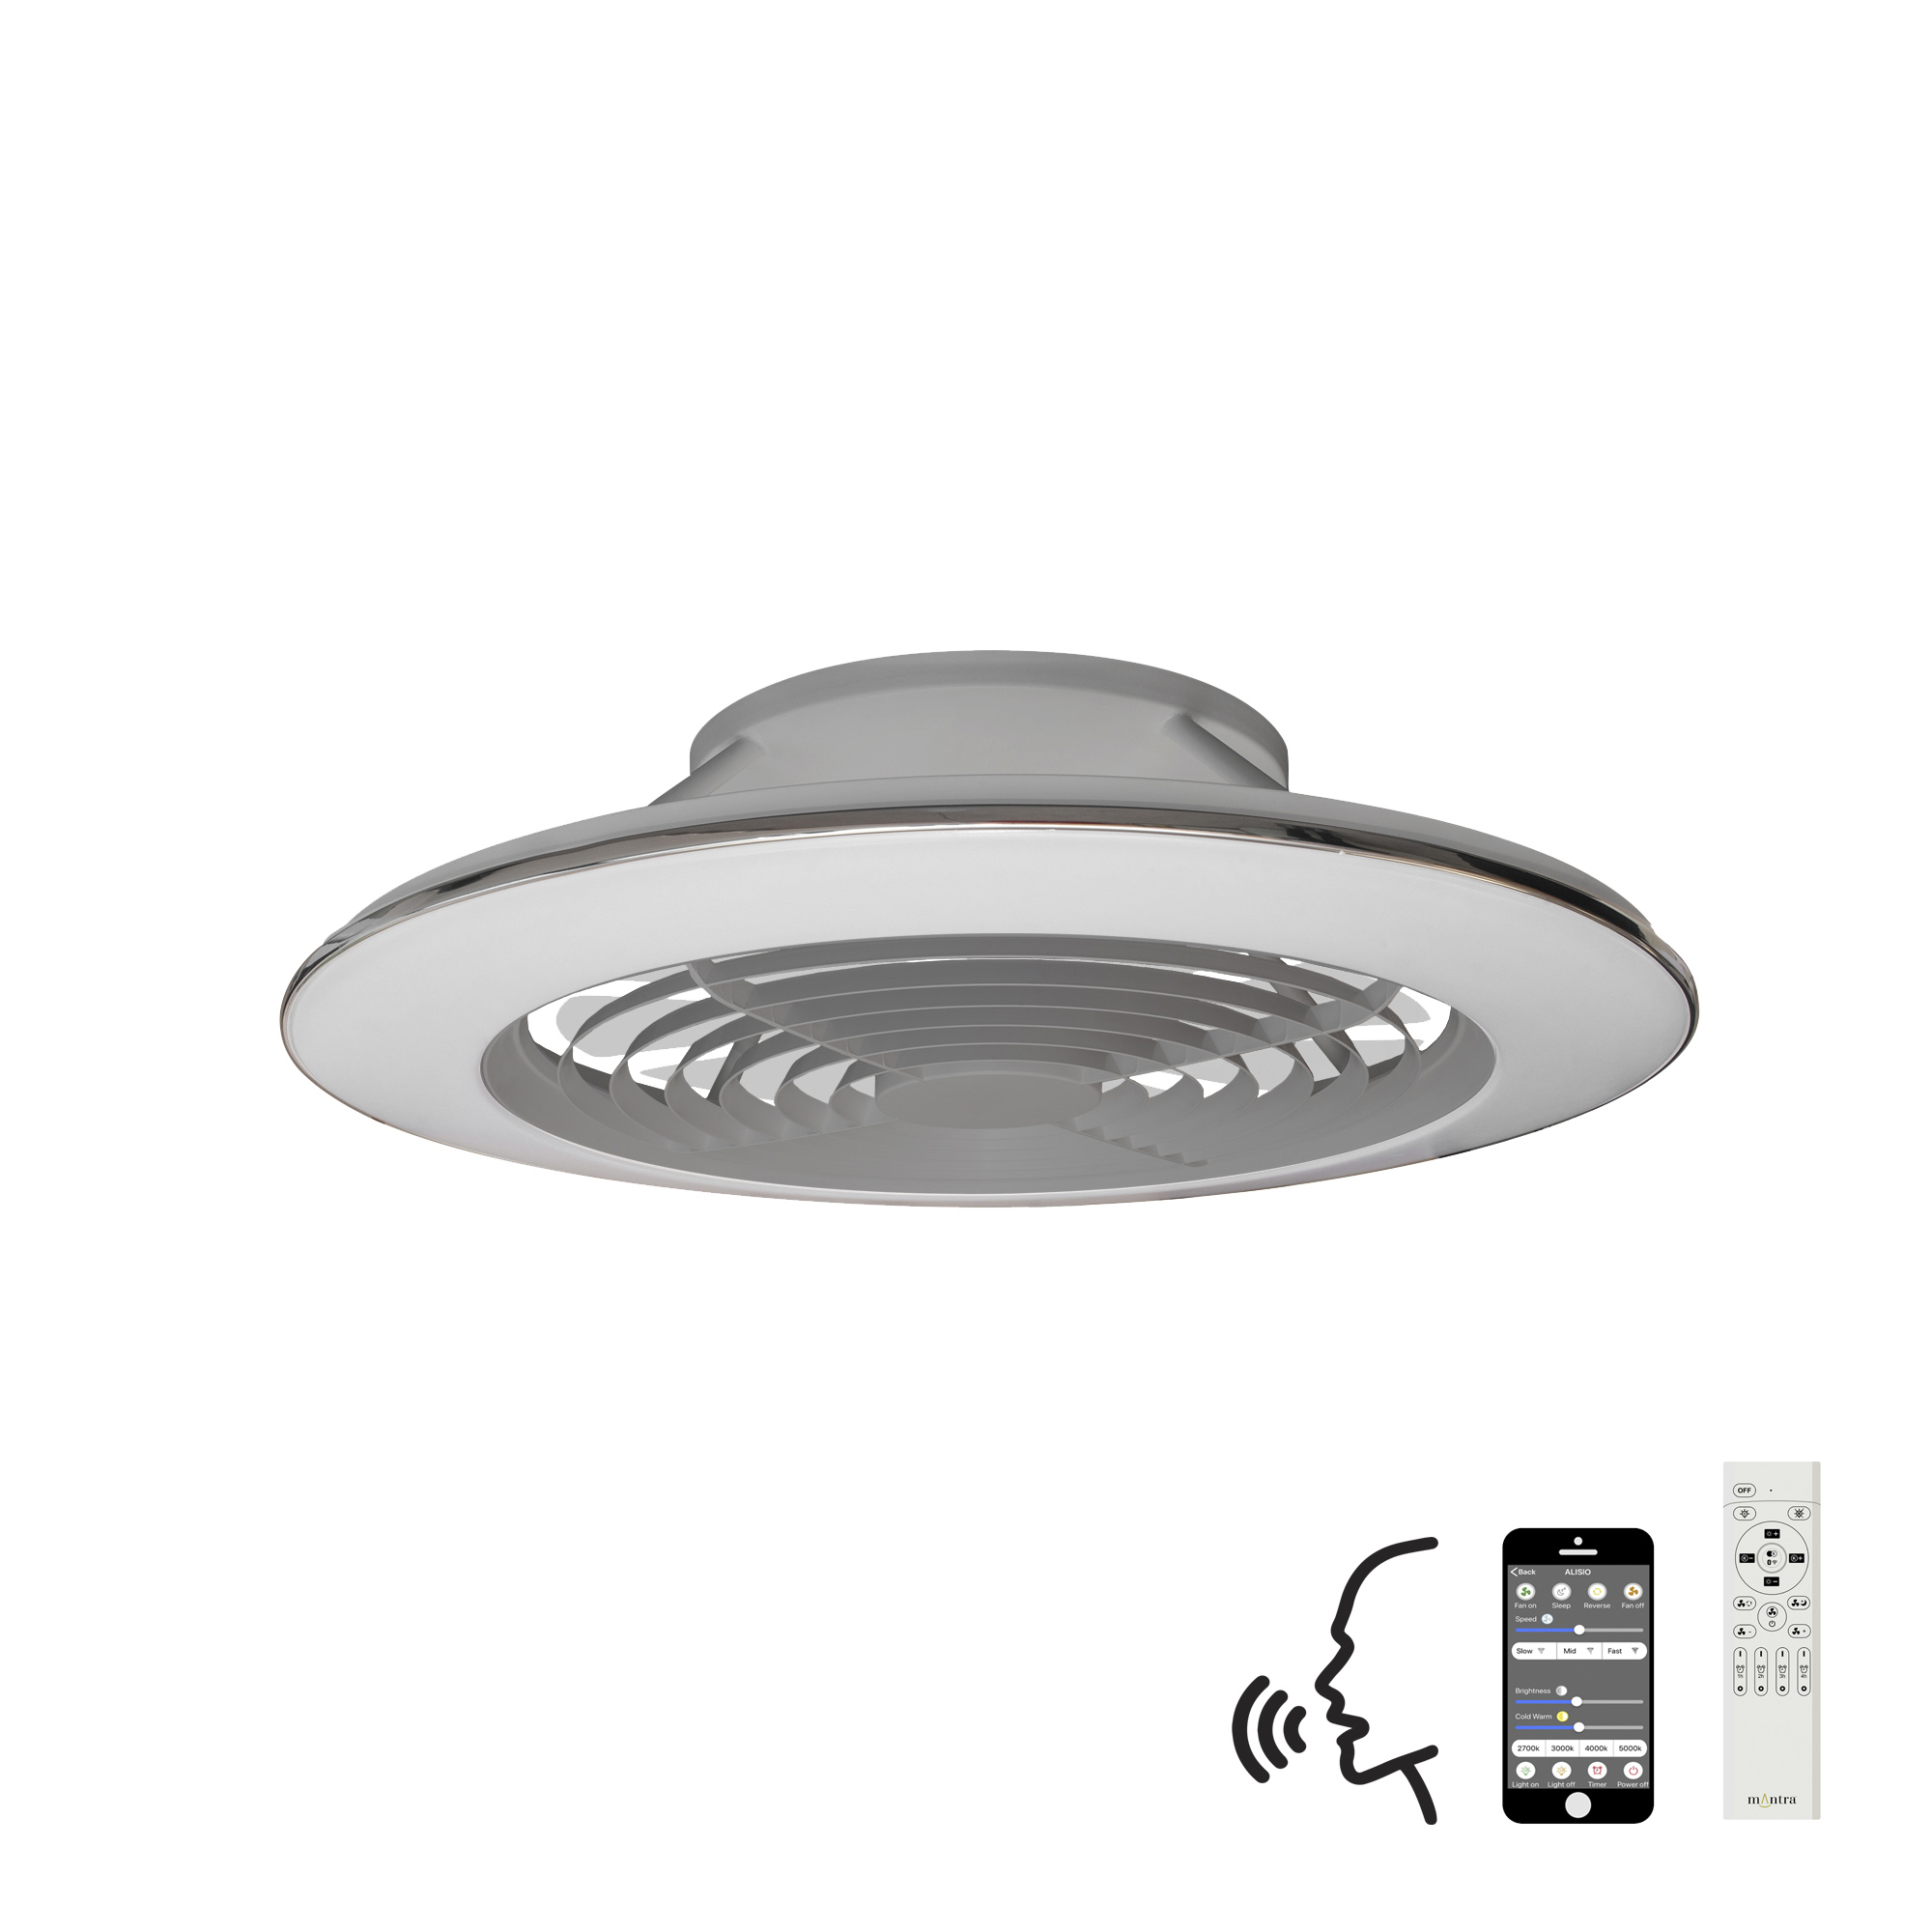 M7491  Alisio XL 95W LED Dimmable Ceiling Light & Fan, Remote / APP / Voice Controlled Silver